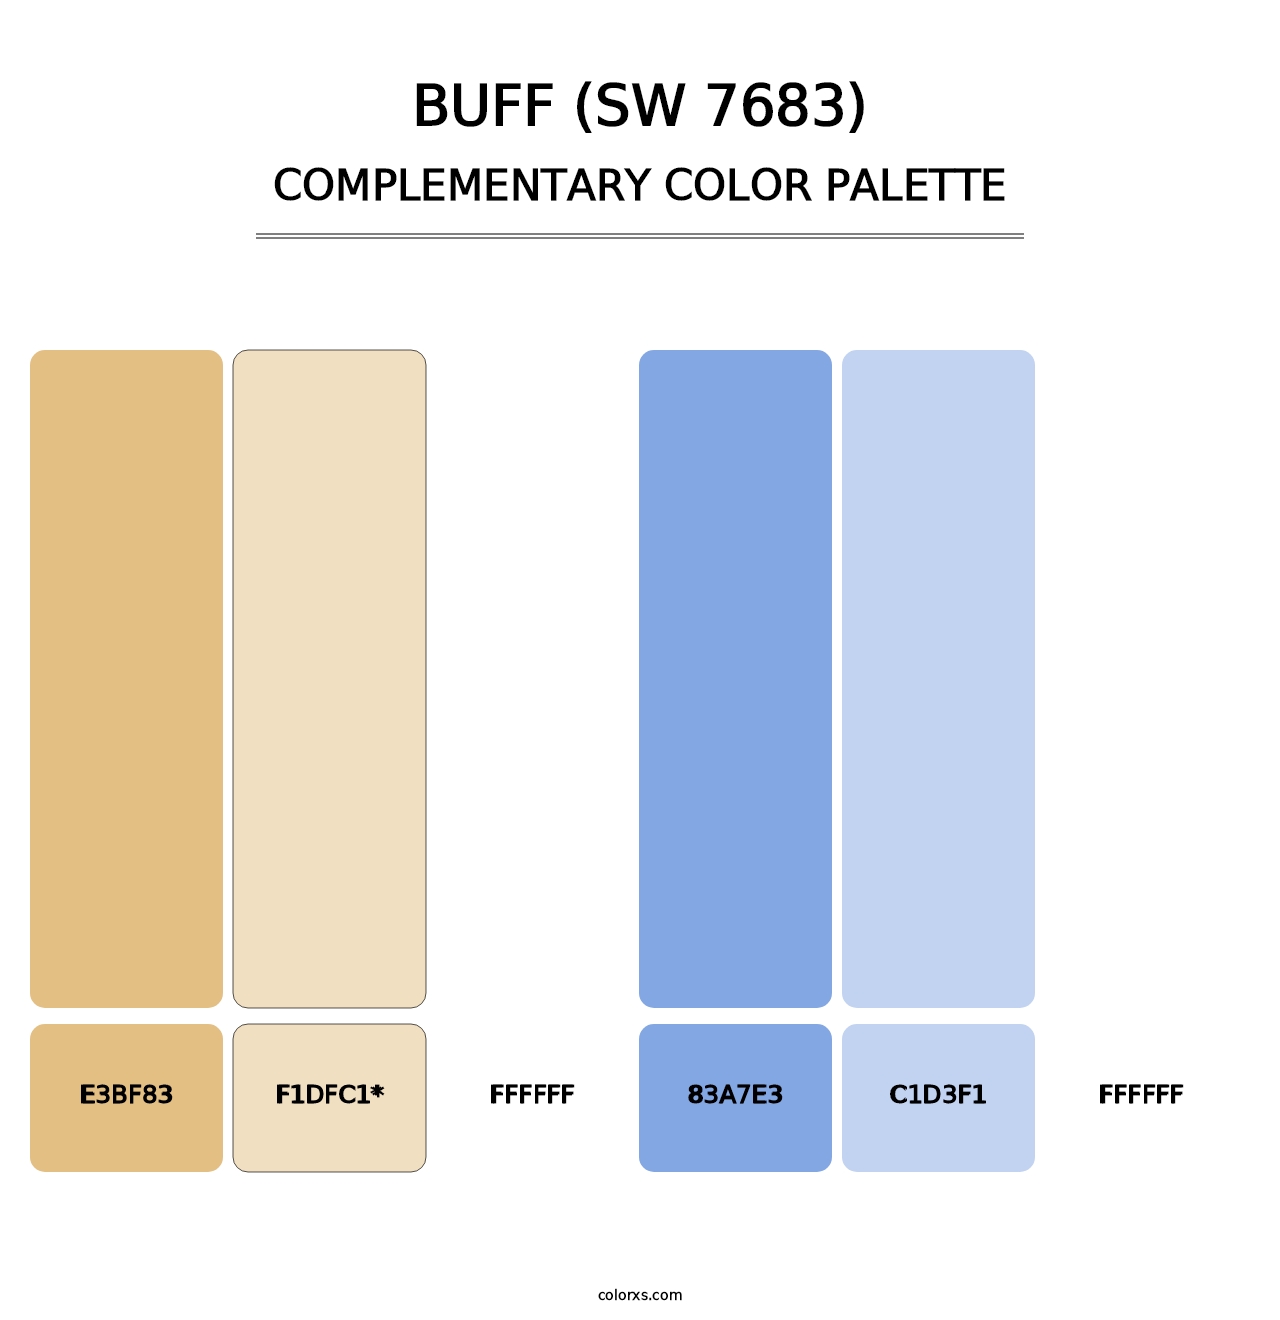 Buff (SW 7683) - Complementary Color Palette